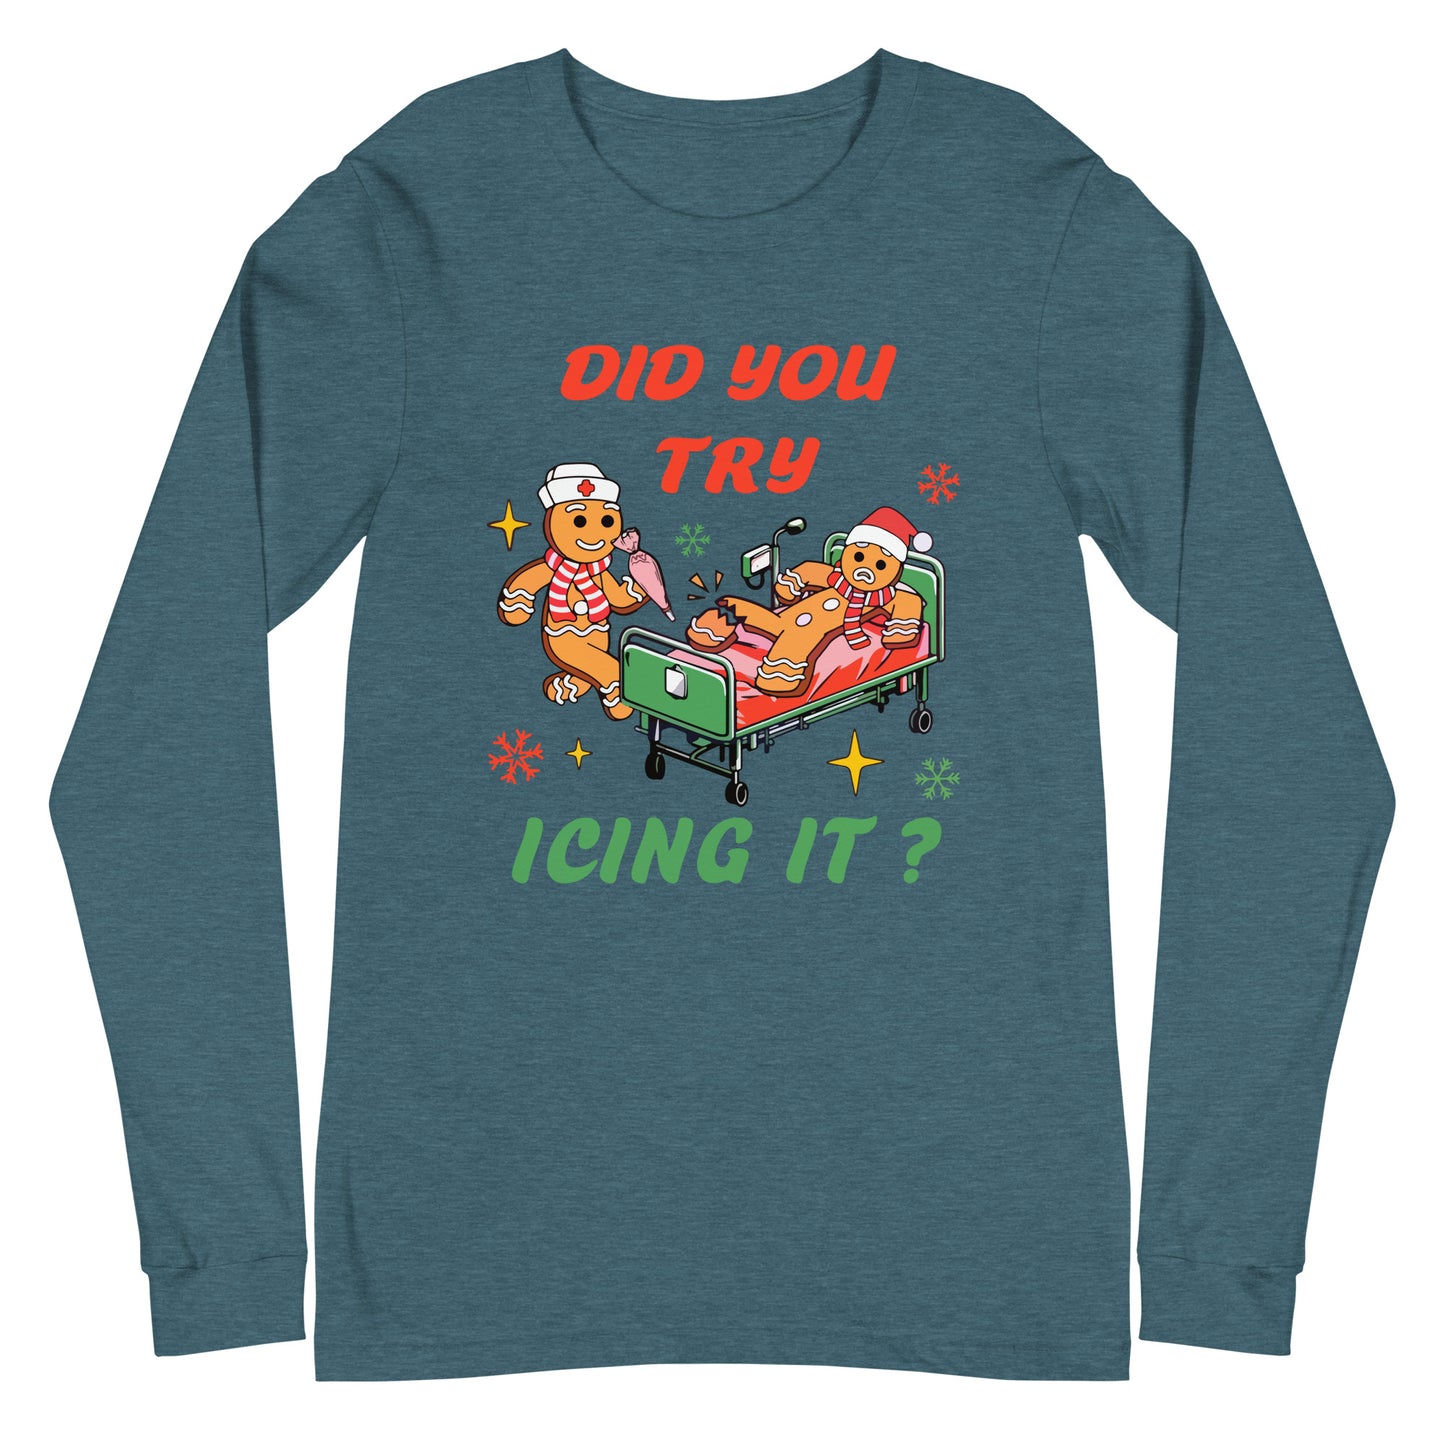 Did you try Icing It Long Sleeve Tshirt